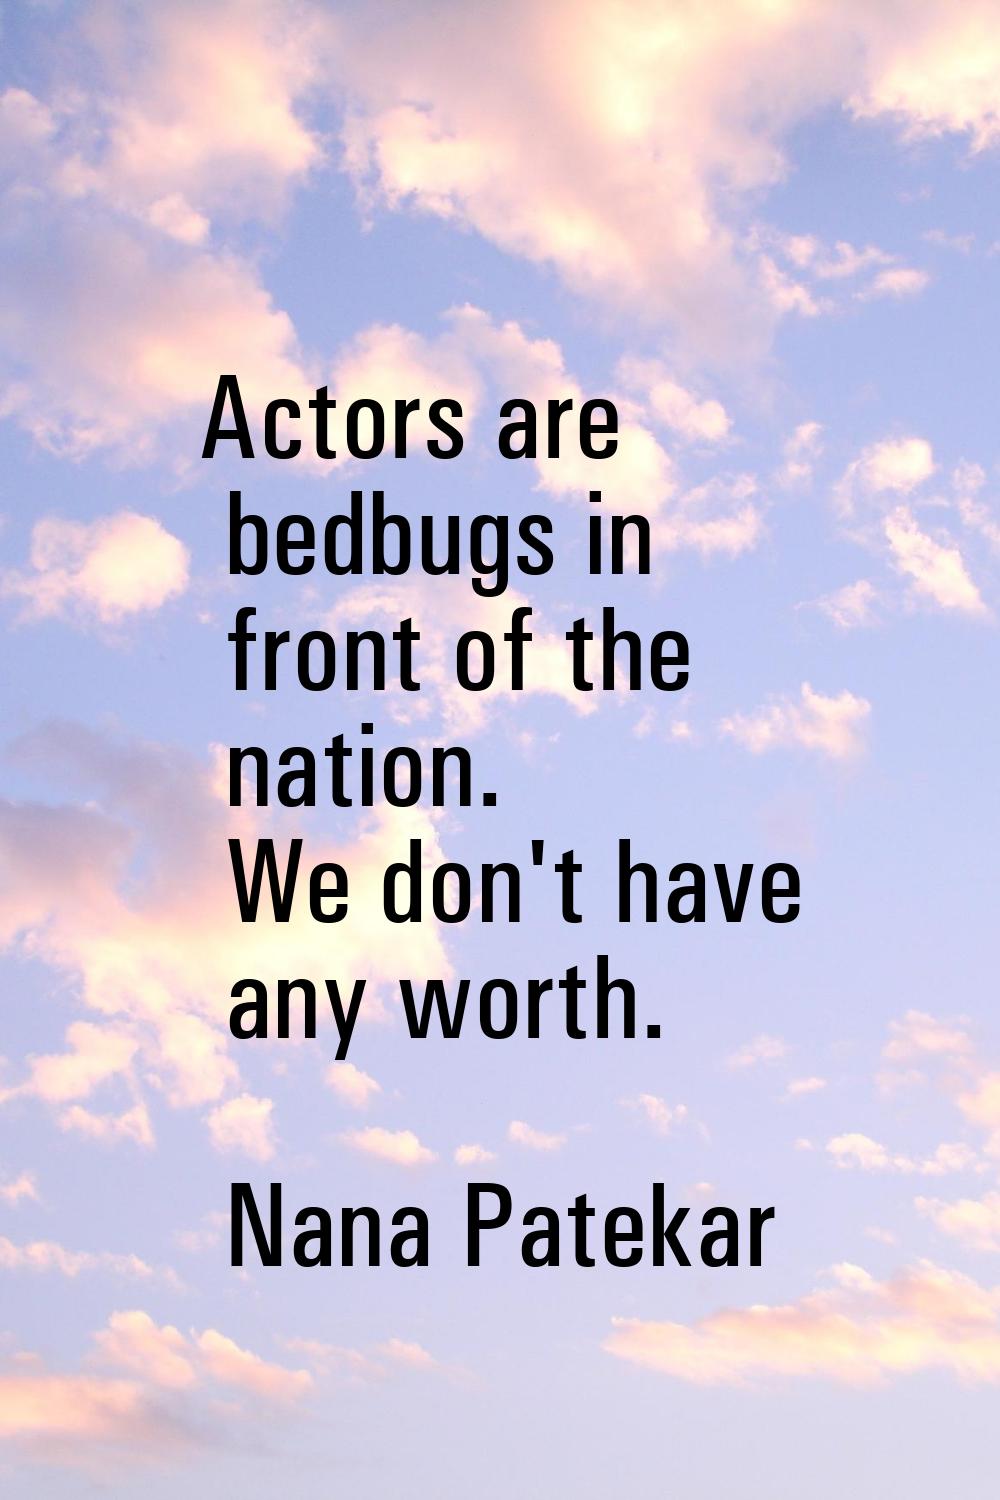 Actors are bedbugs in front of the nation. We don't have any worth.